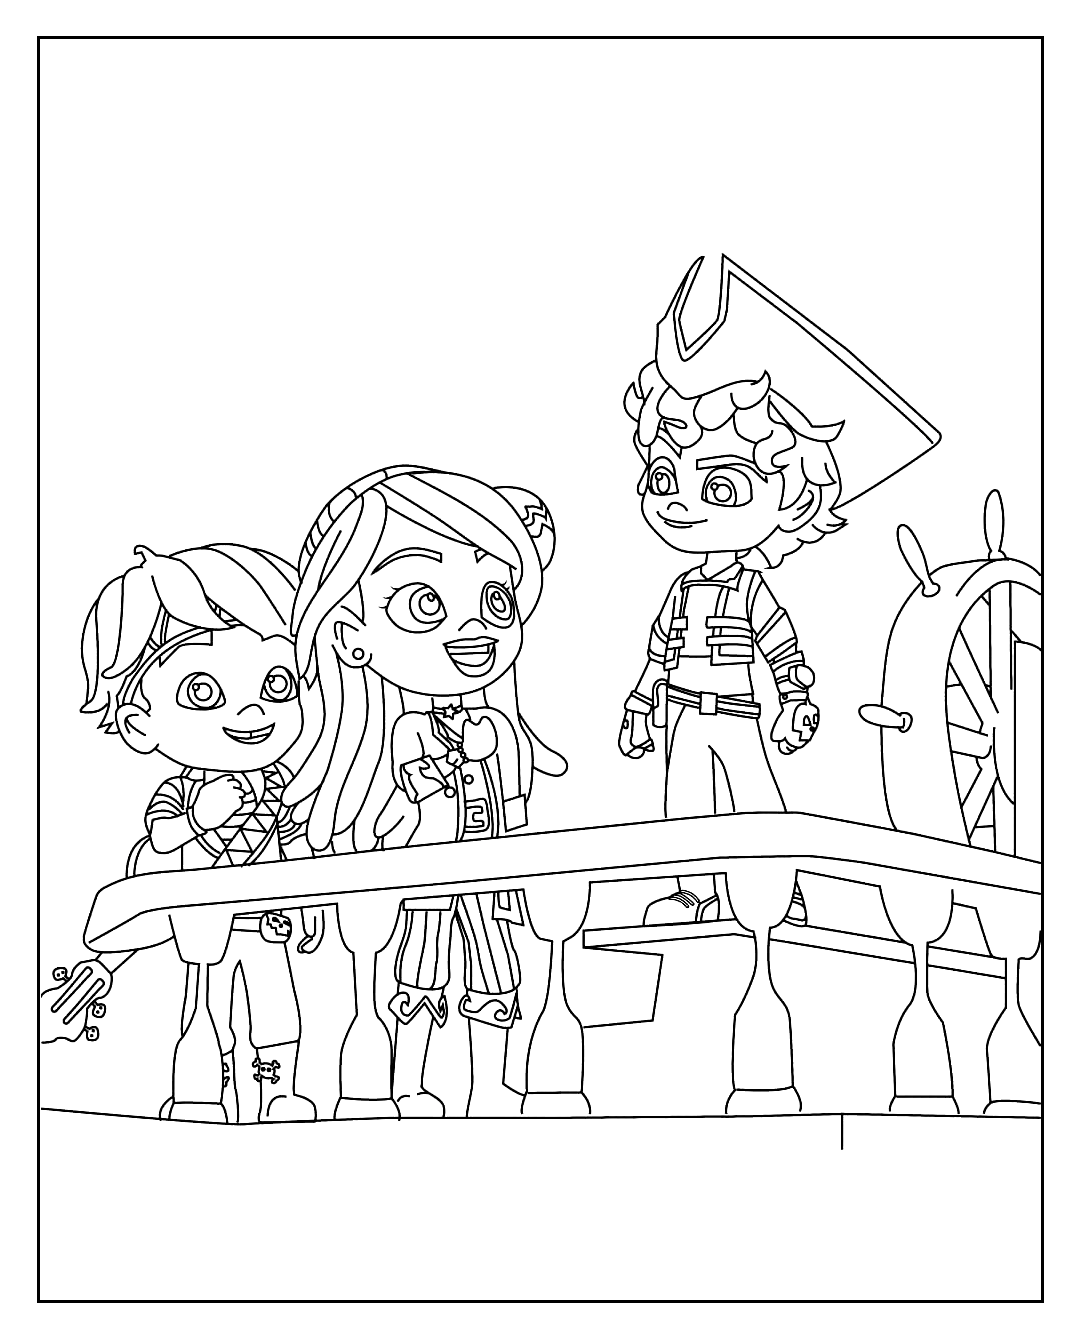 Santiago And Friends Coloring Pages